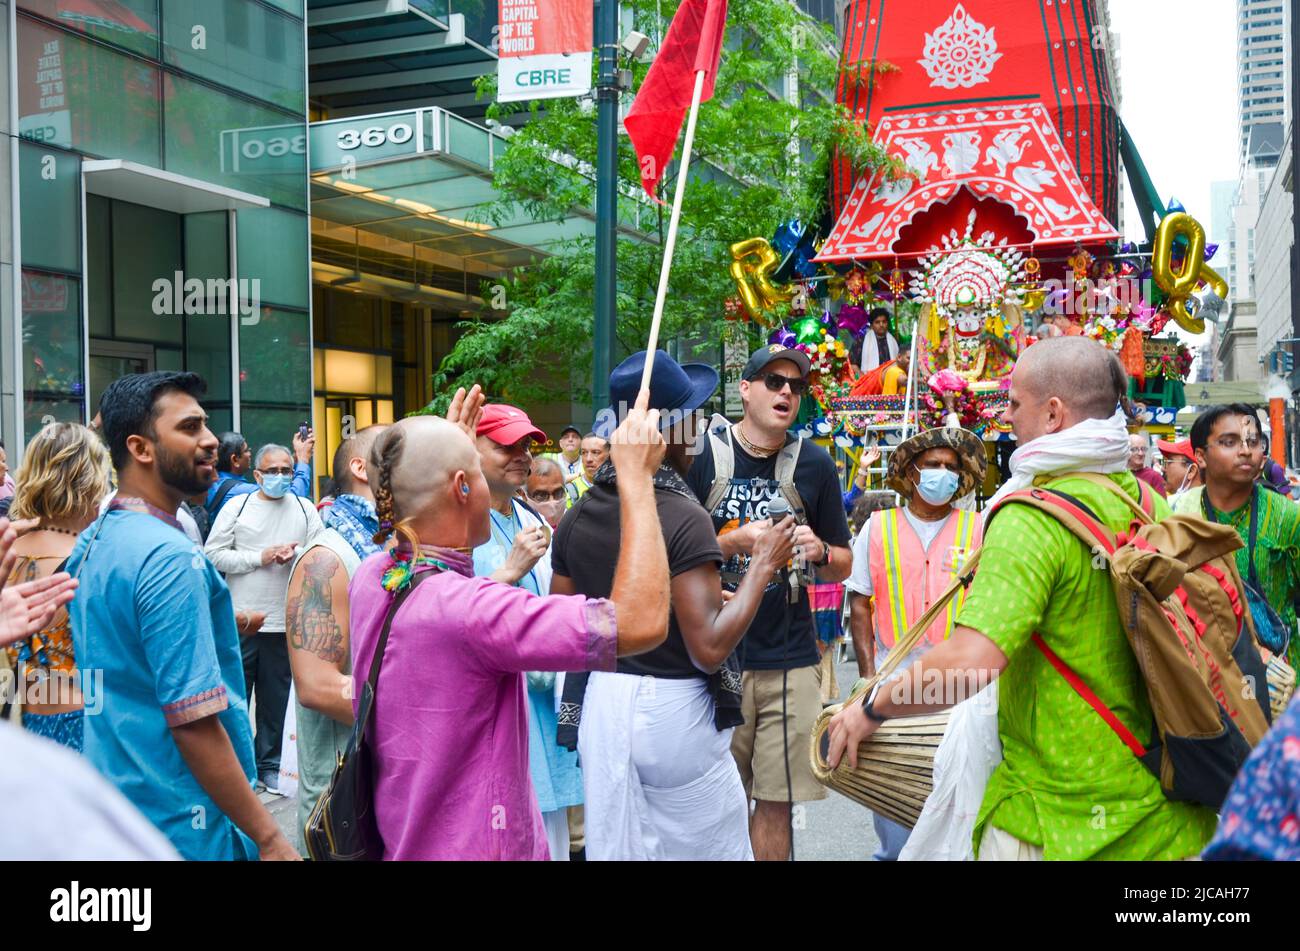 Hare Krishna followers are seen dancing on Fifth Avenue, New York City during the Hare Krishna Parade on June 11, 2022. Stock Photo